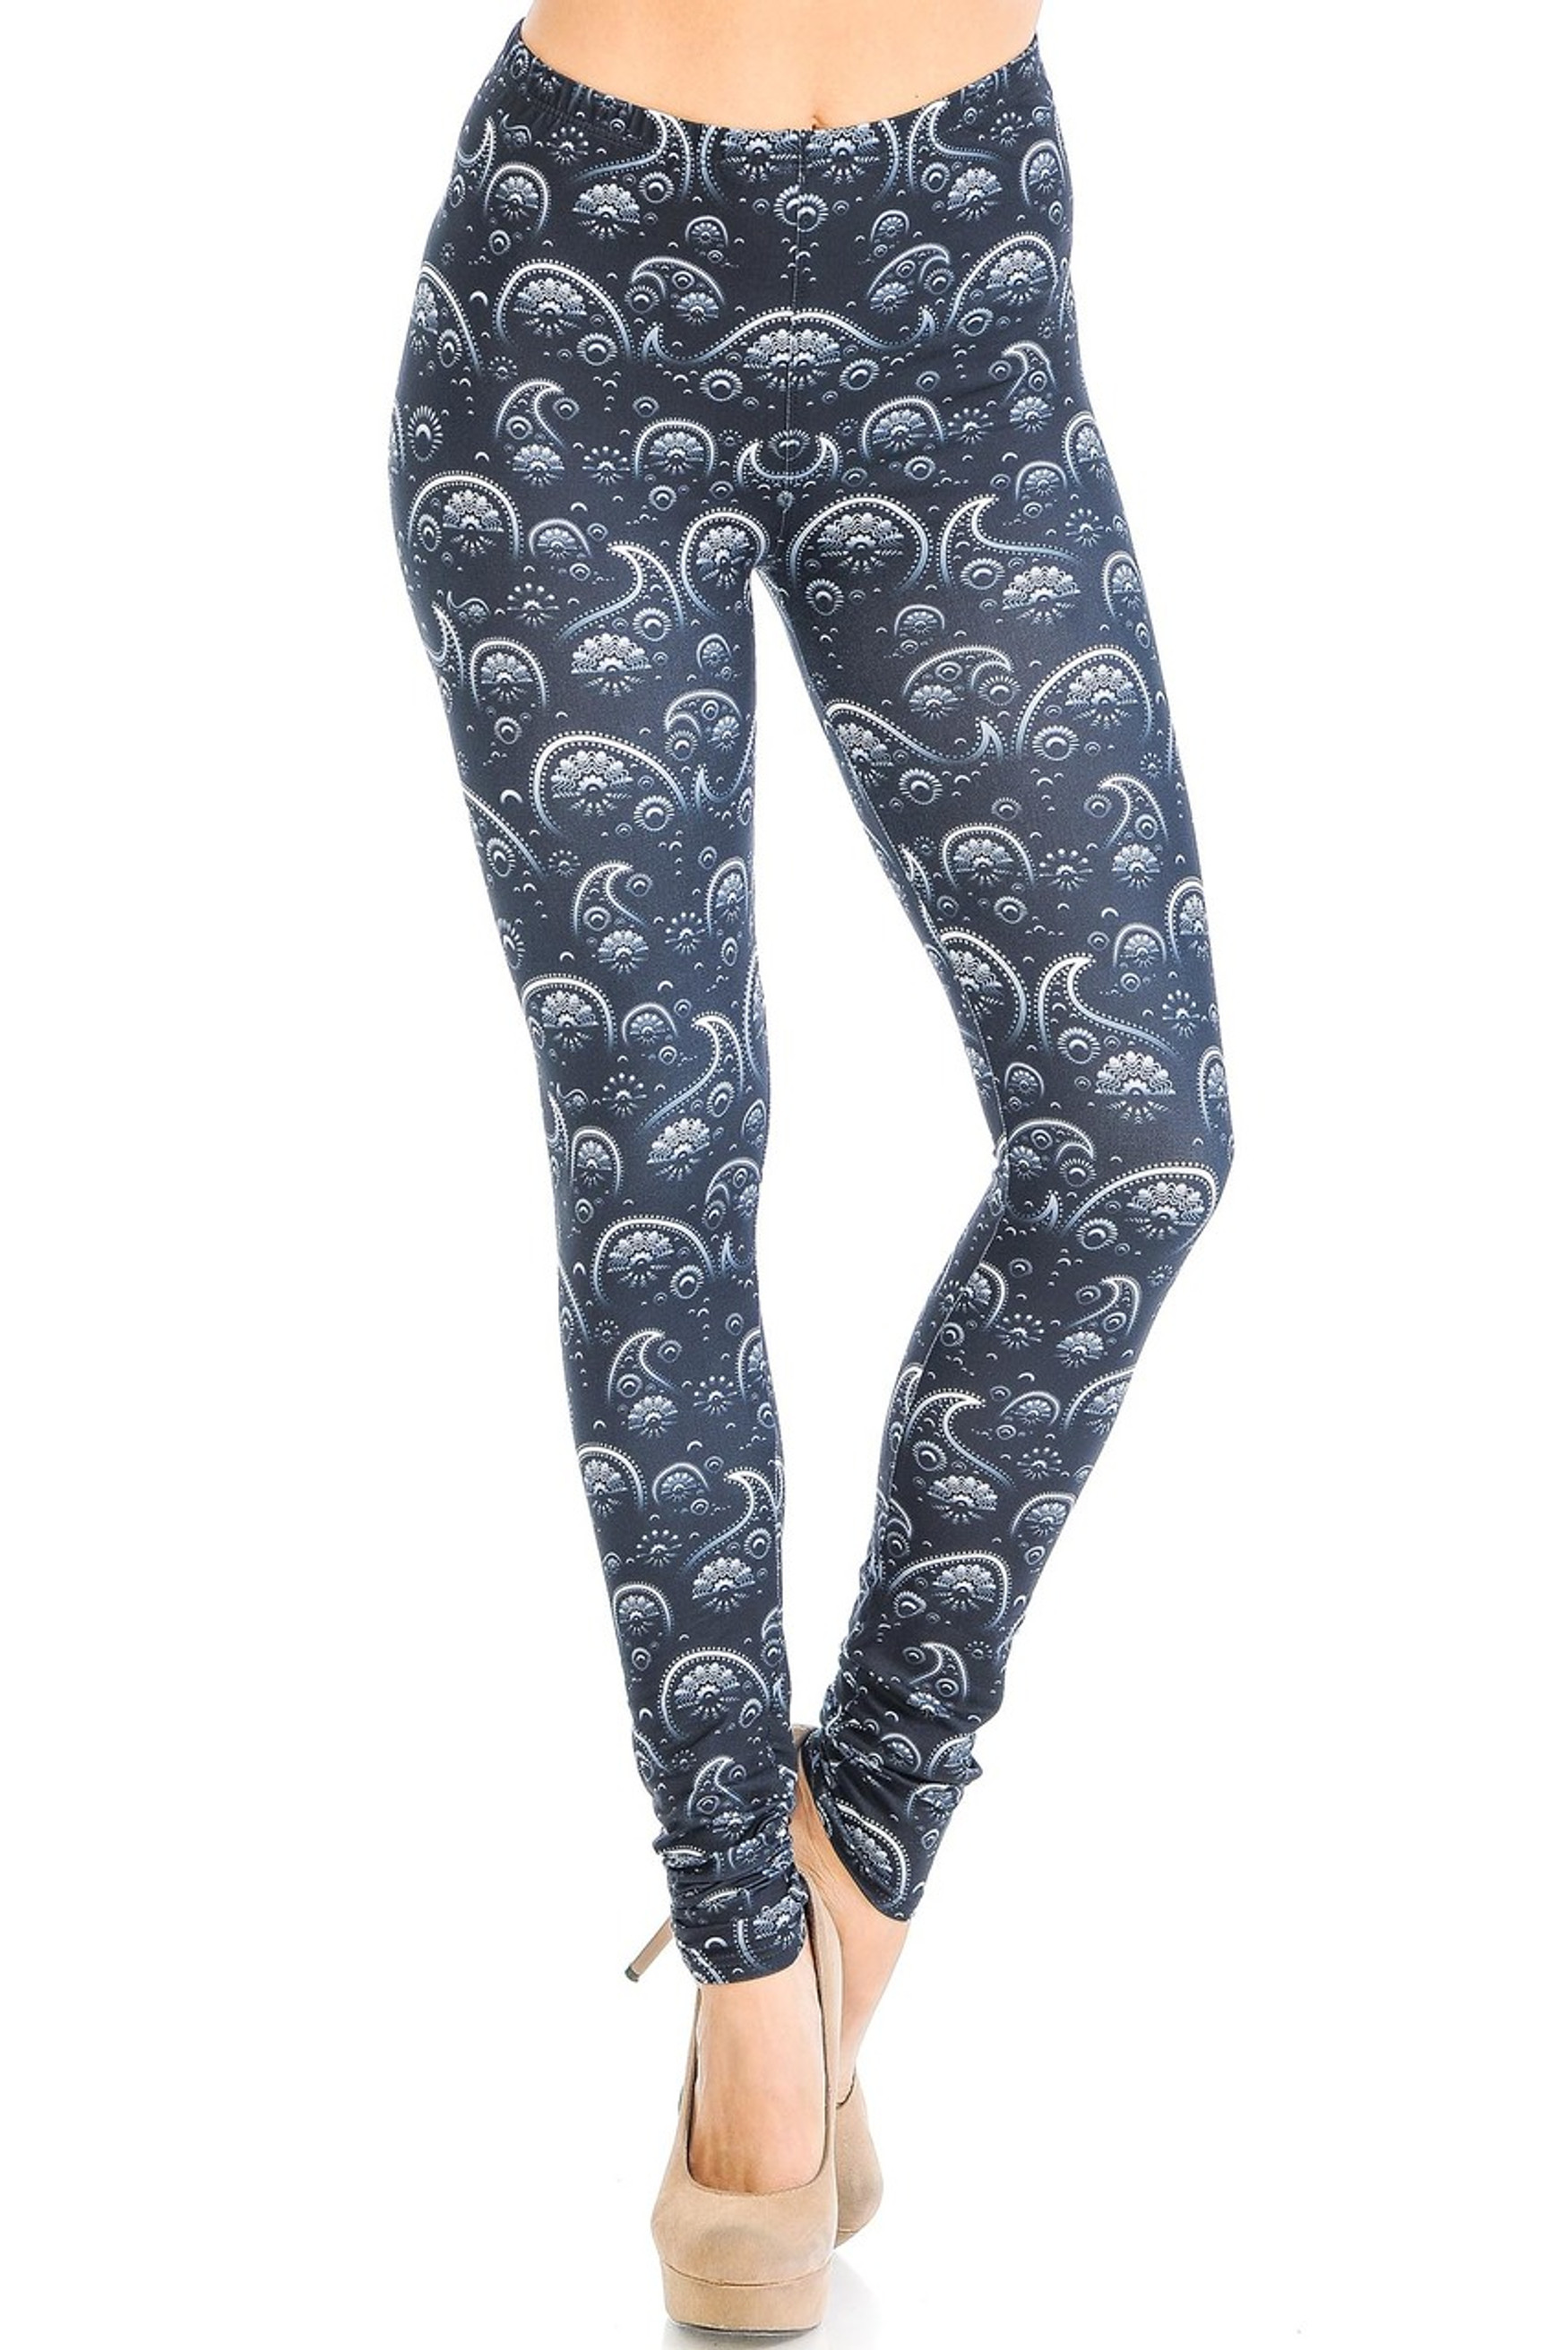 Creamy Soft Fading Paisley Leggings - Signature Collection